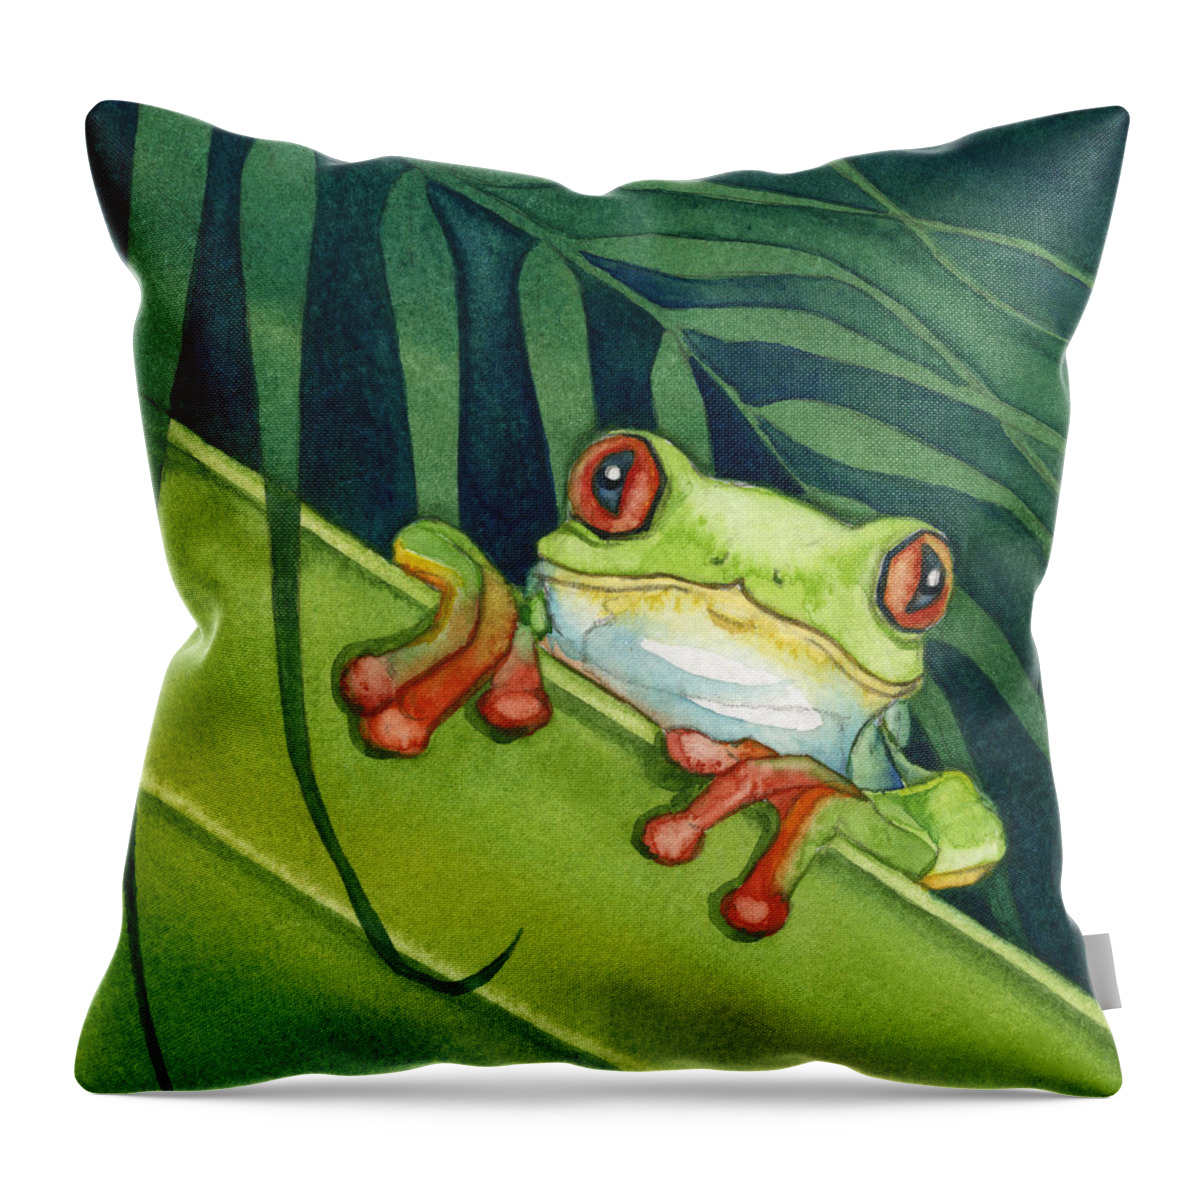  Throw Pillow featuring the painting Frog Peek by Lyse Anthony